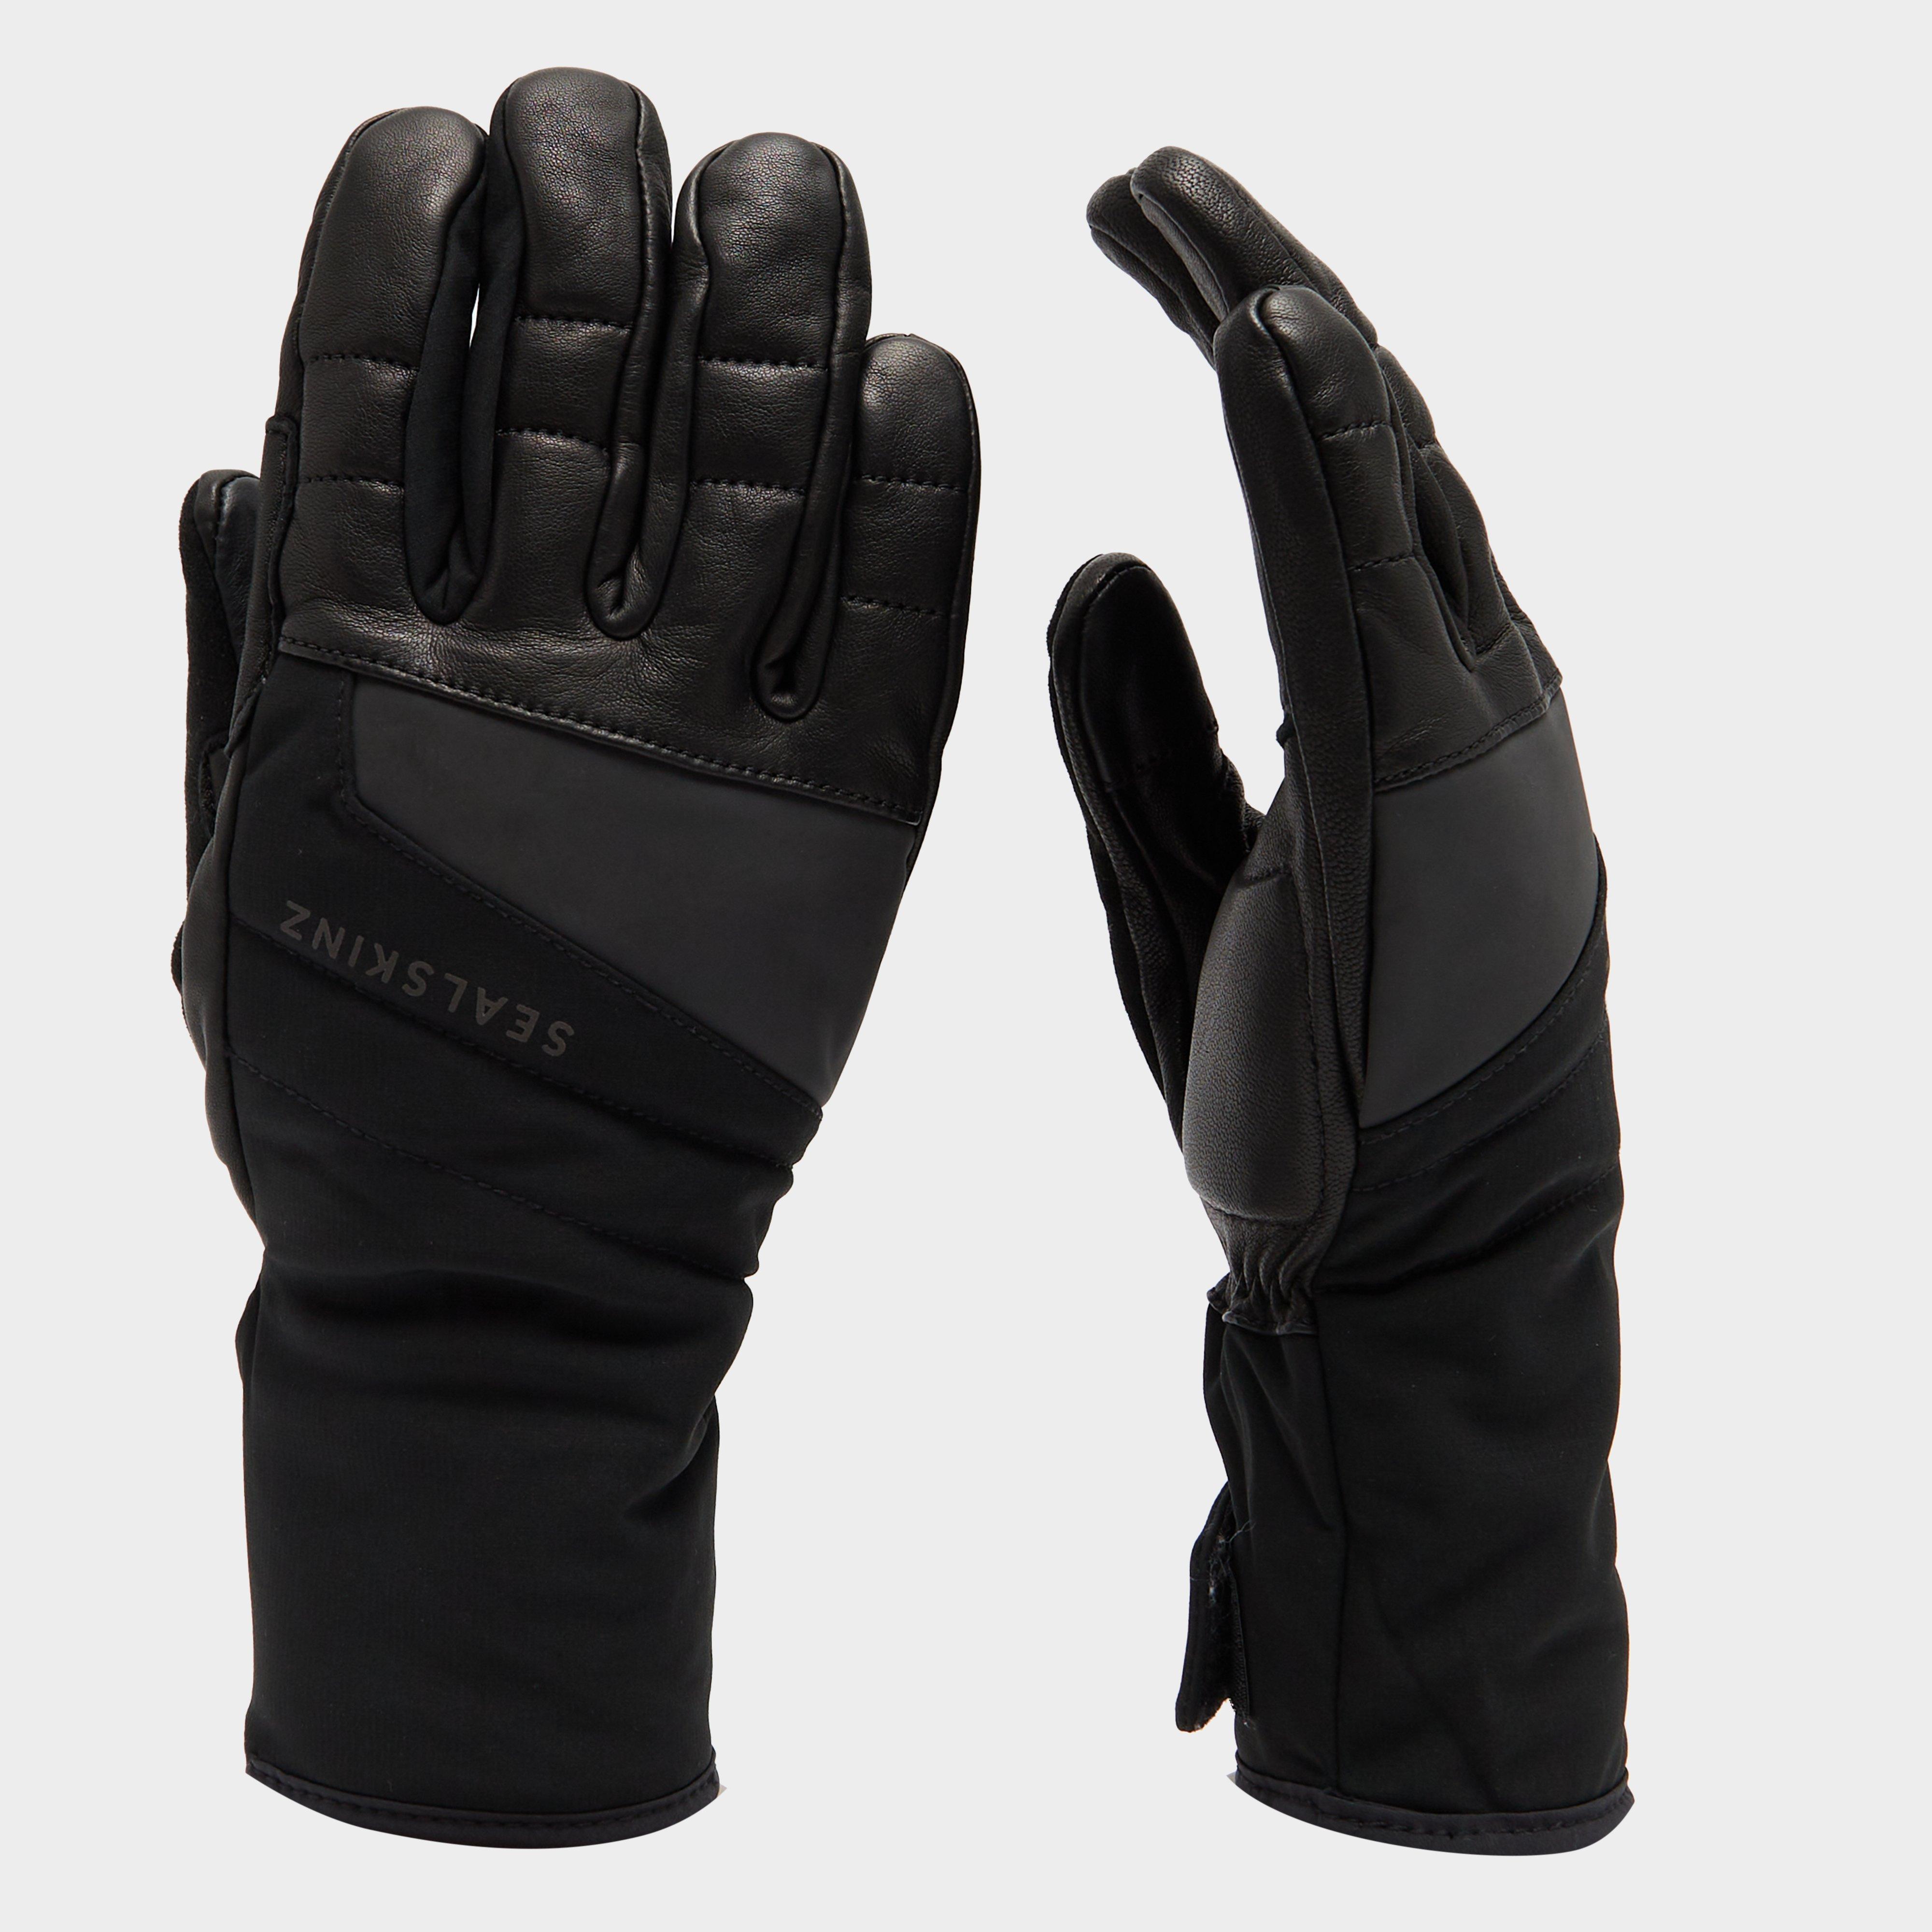 Photos - Cycling Gloves Waterproof Extreme Cold Weather Gauntlet in Black, Black 